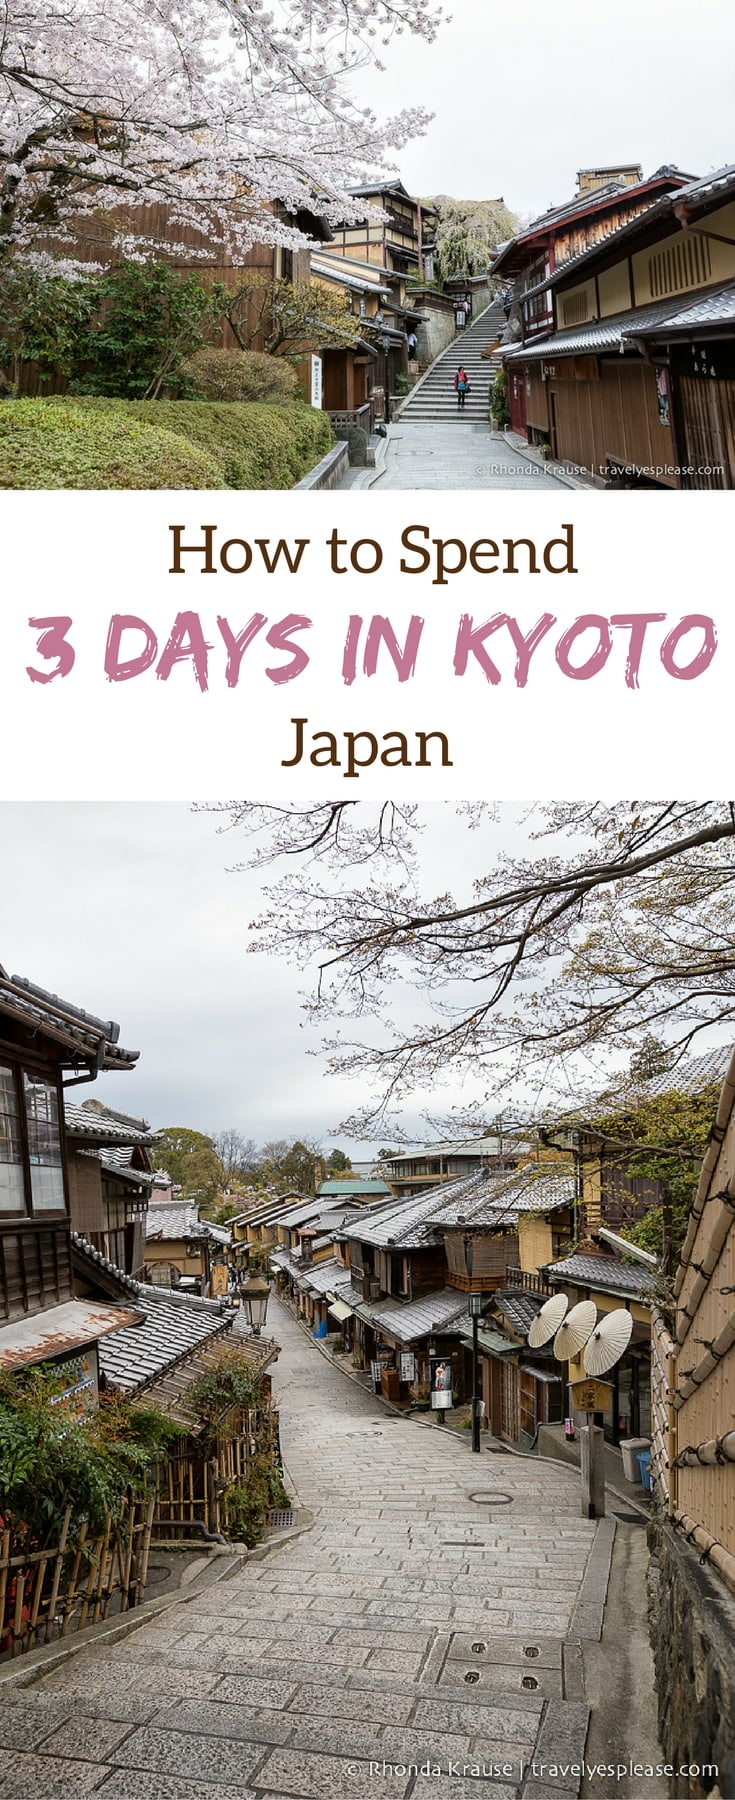 How to Spend 3 Days in Kyoto- Our Itinerary